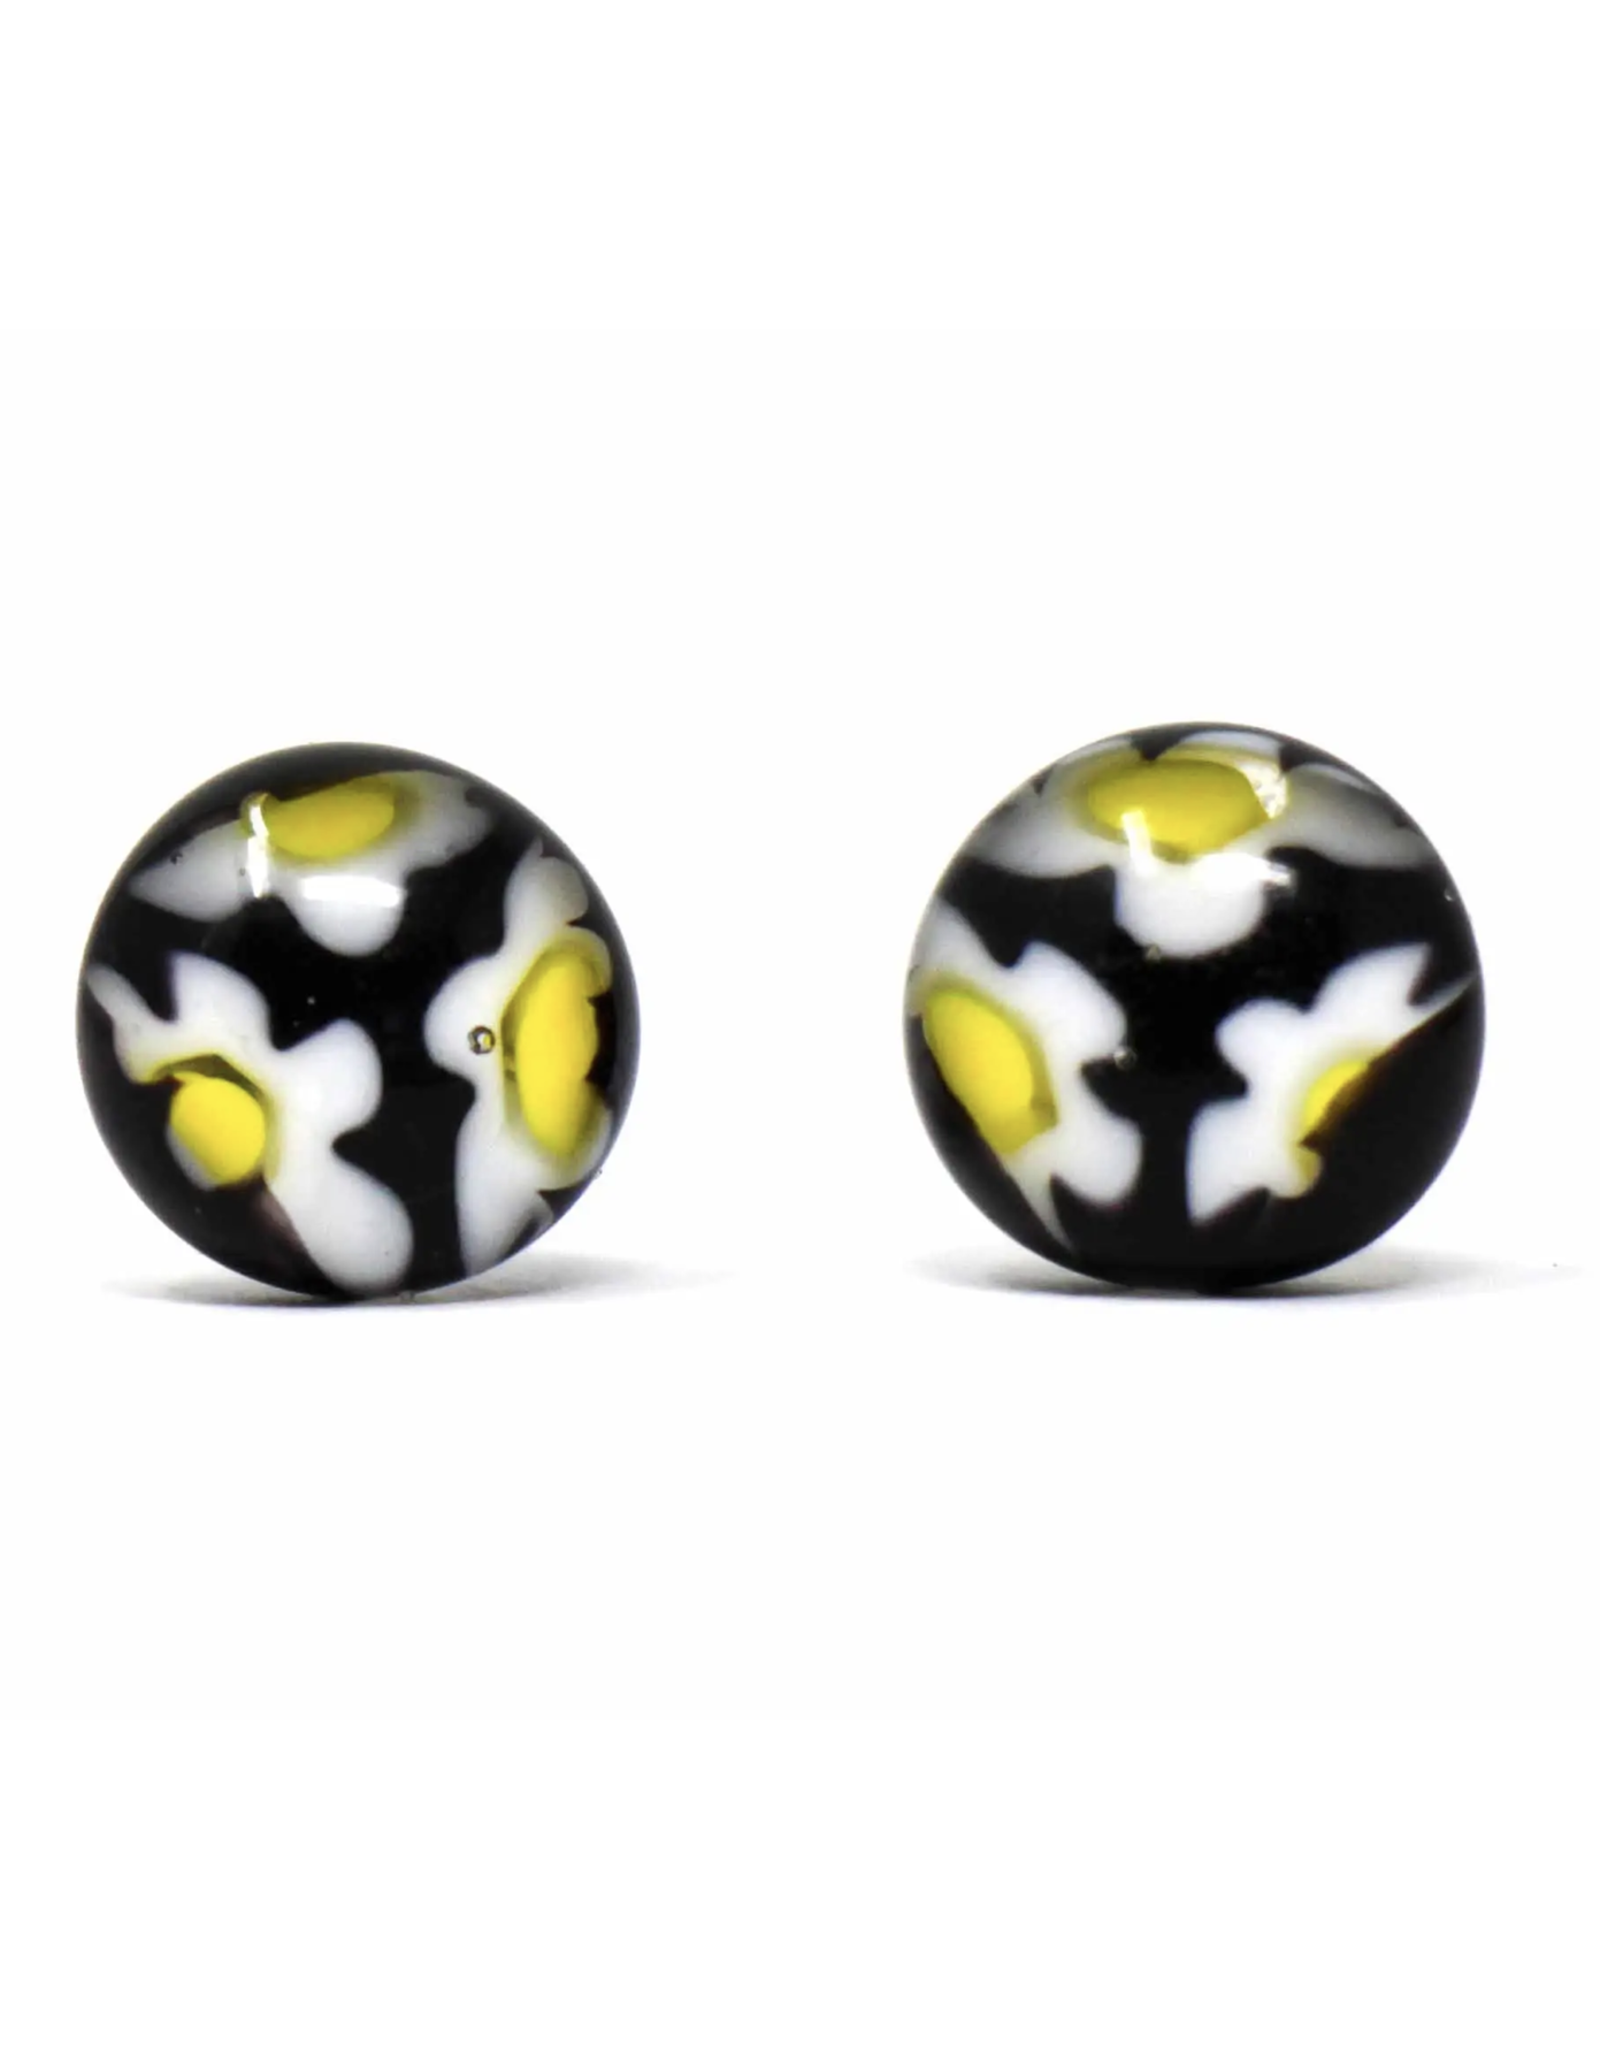 Trade roots Round Glass Stud Earrings, Black/White Flowers, Chile